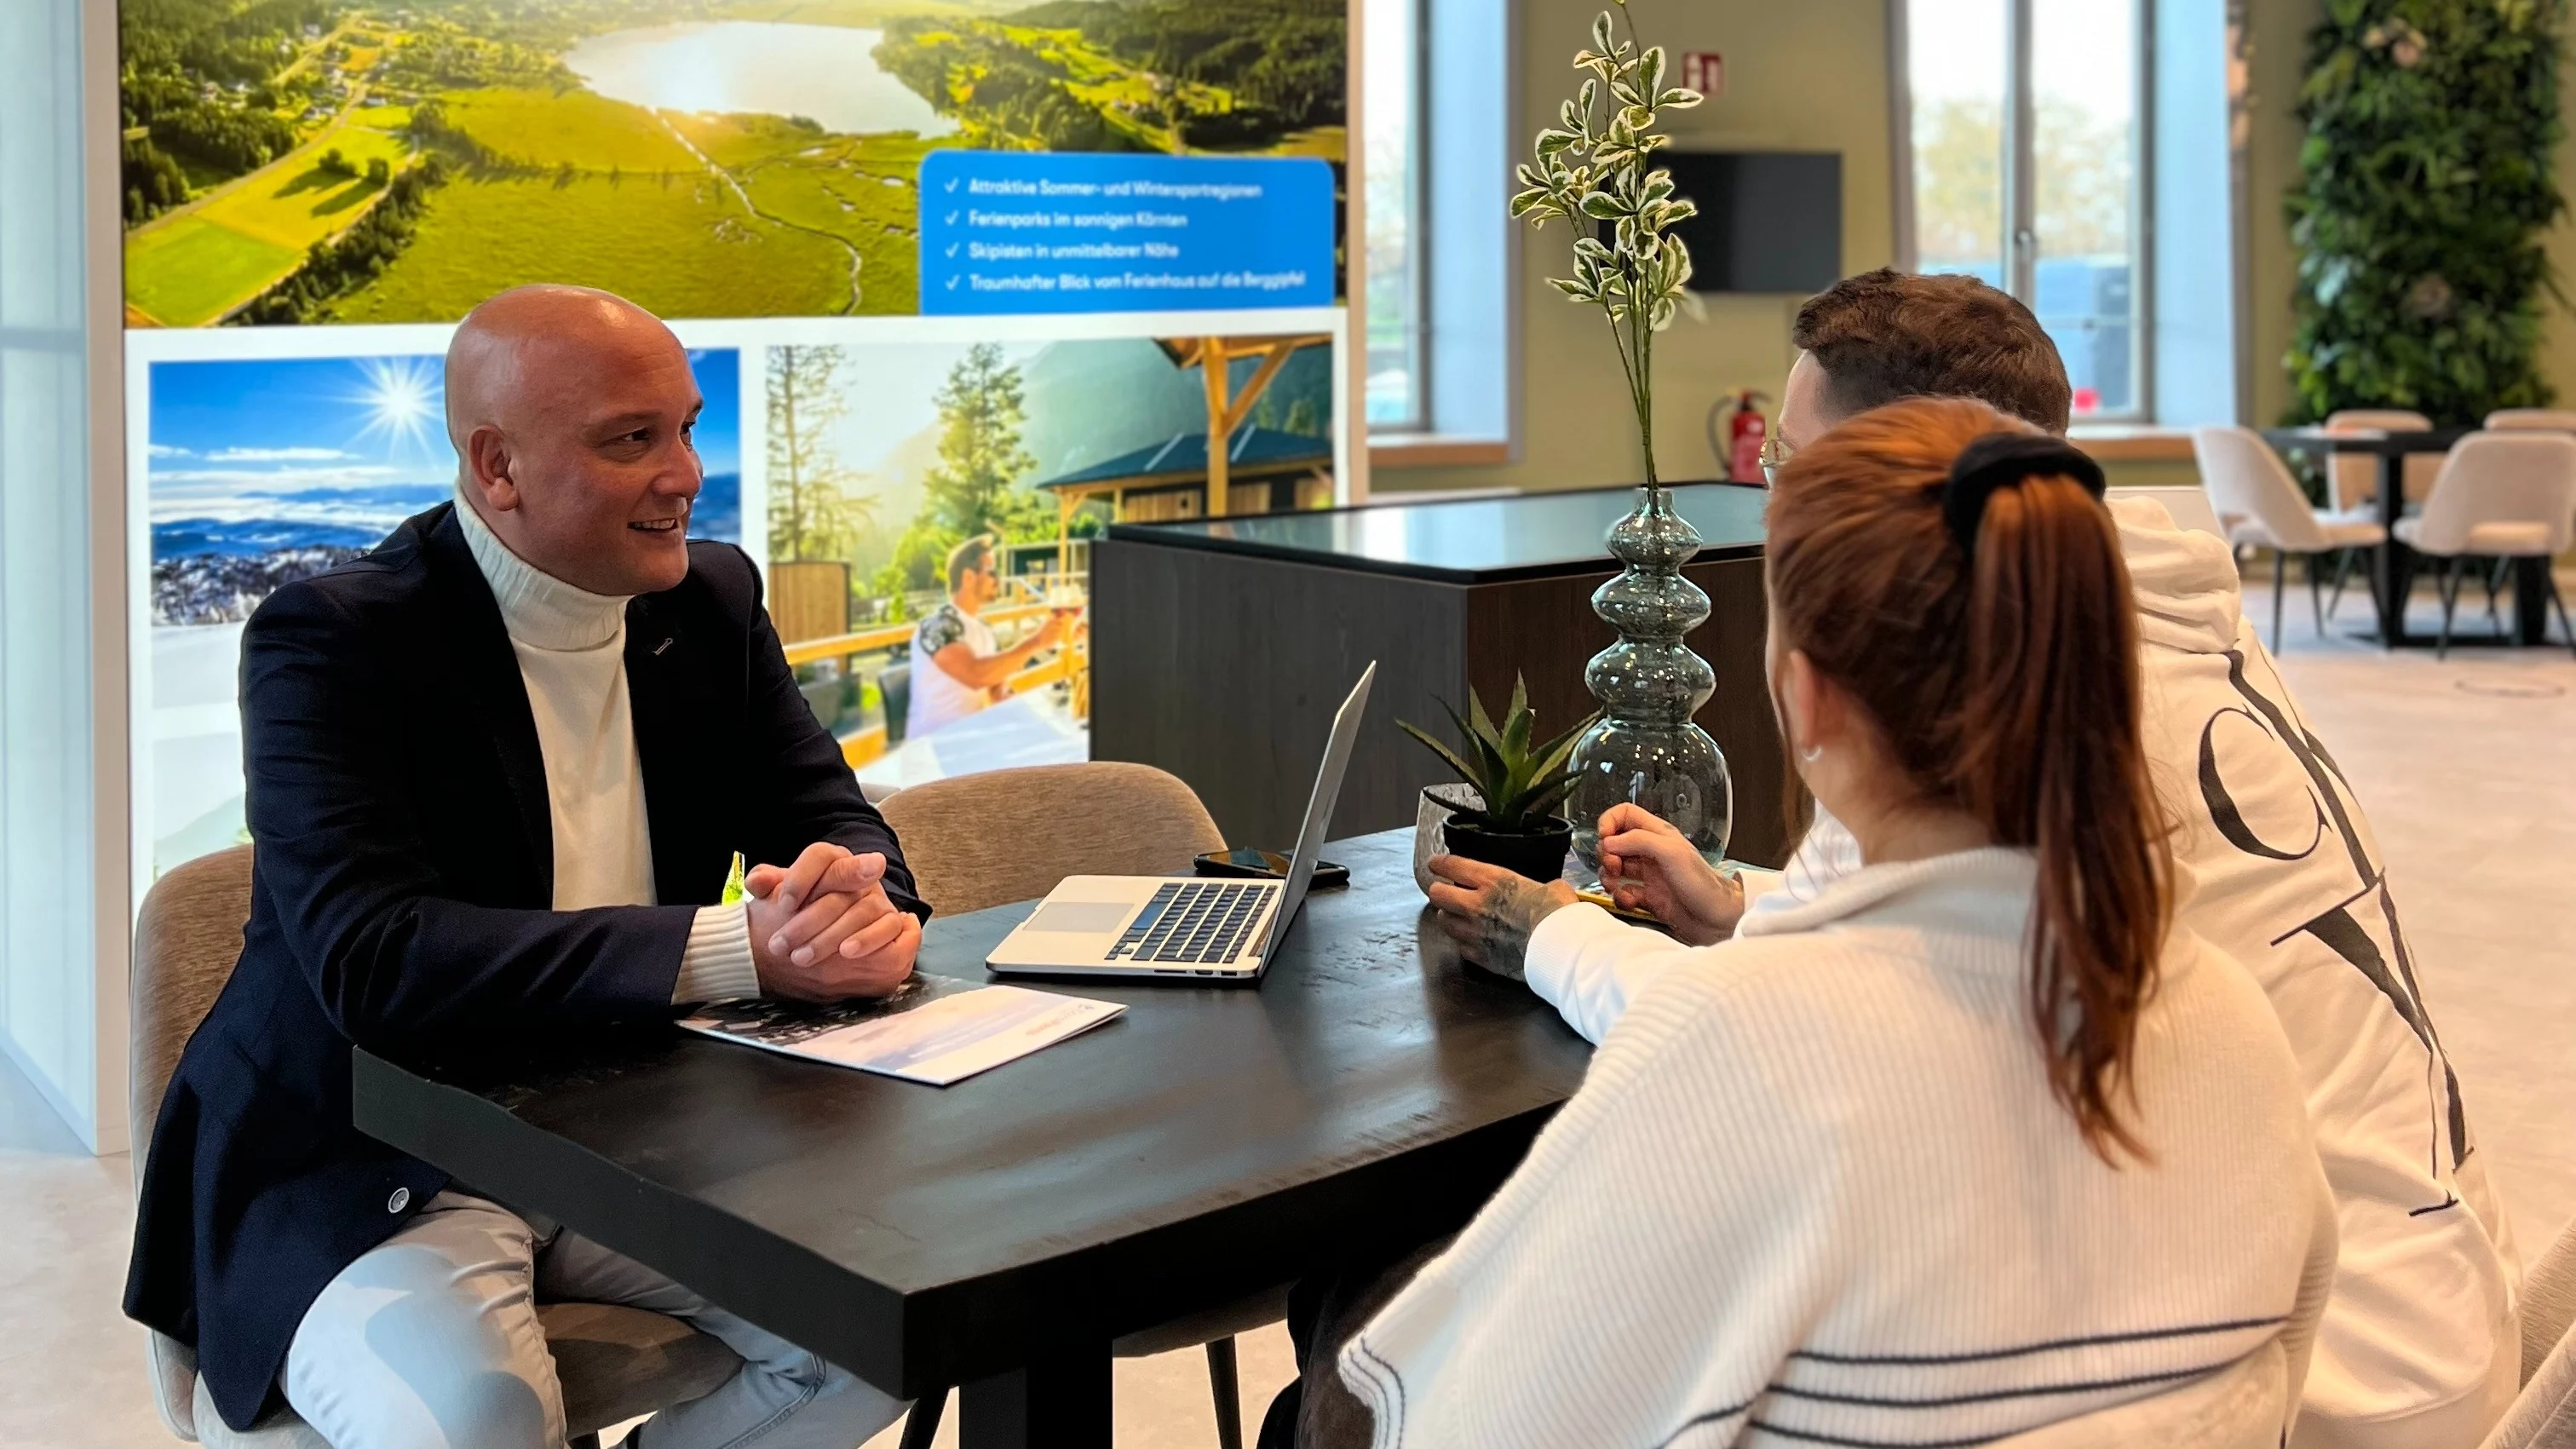 EuroParcs sales consultation in Experience Center